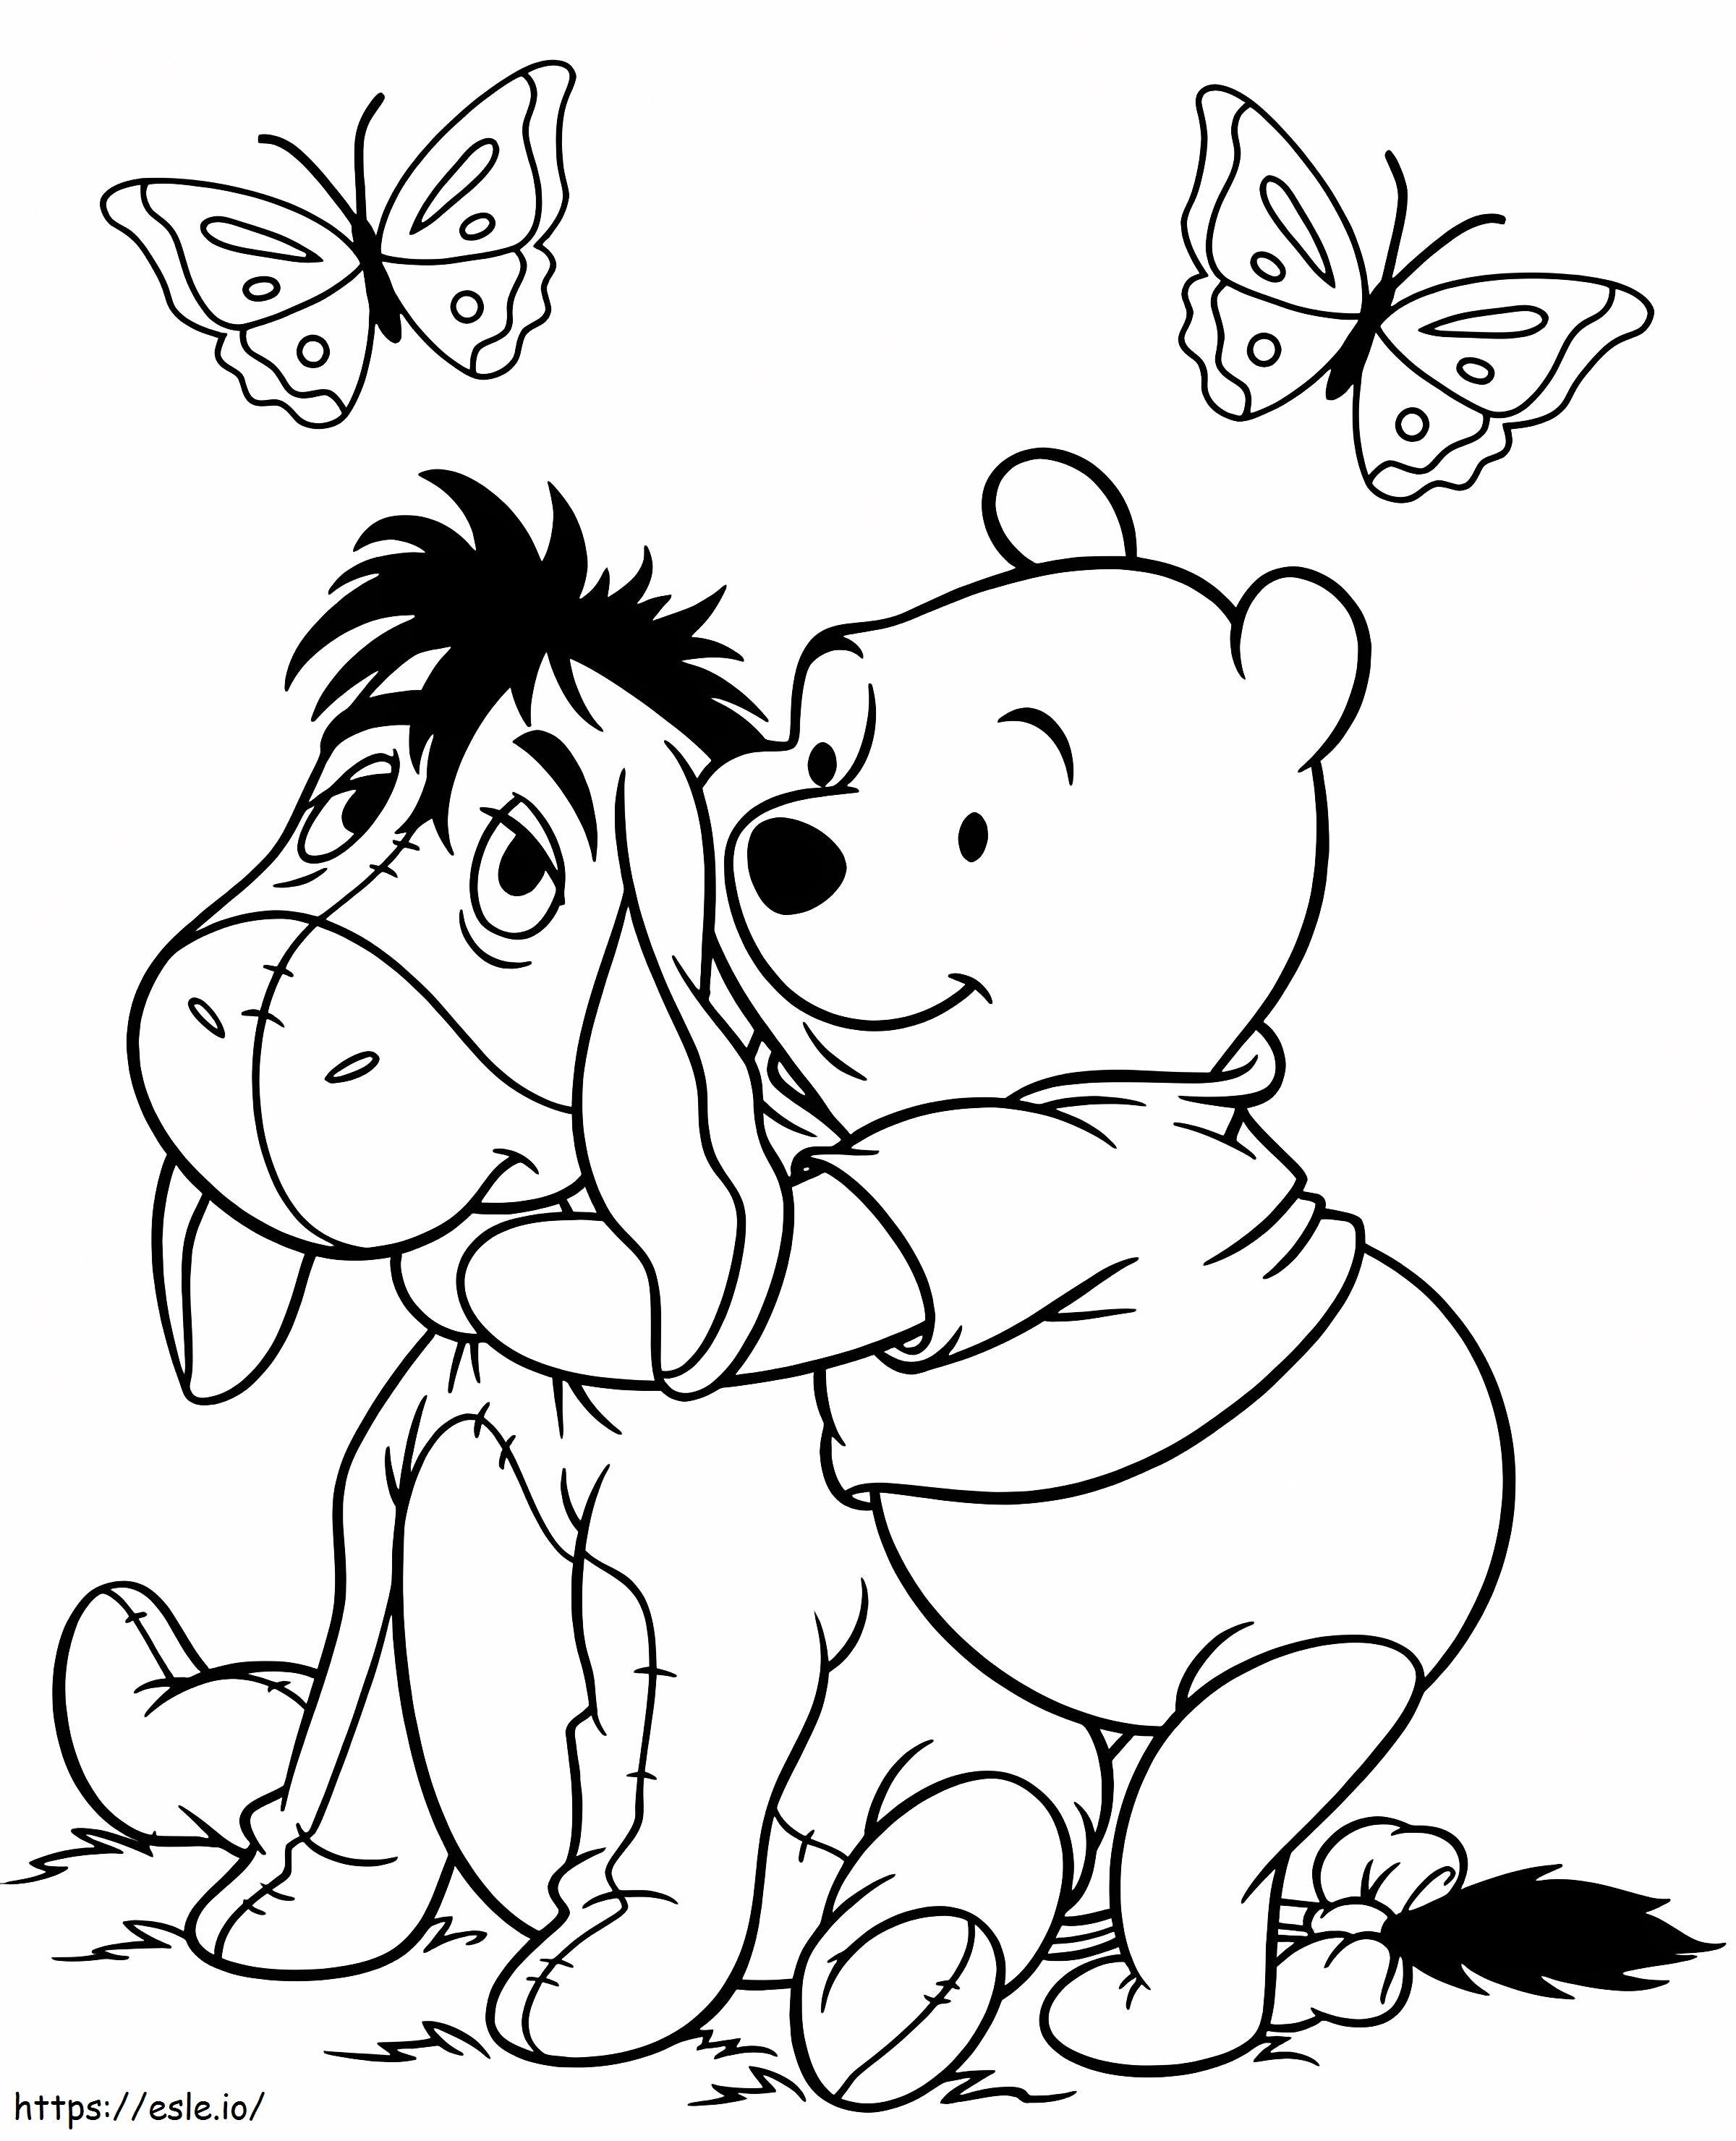 Pooh With Eeyore And Butterfly coloring page